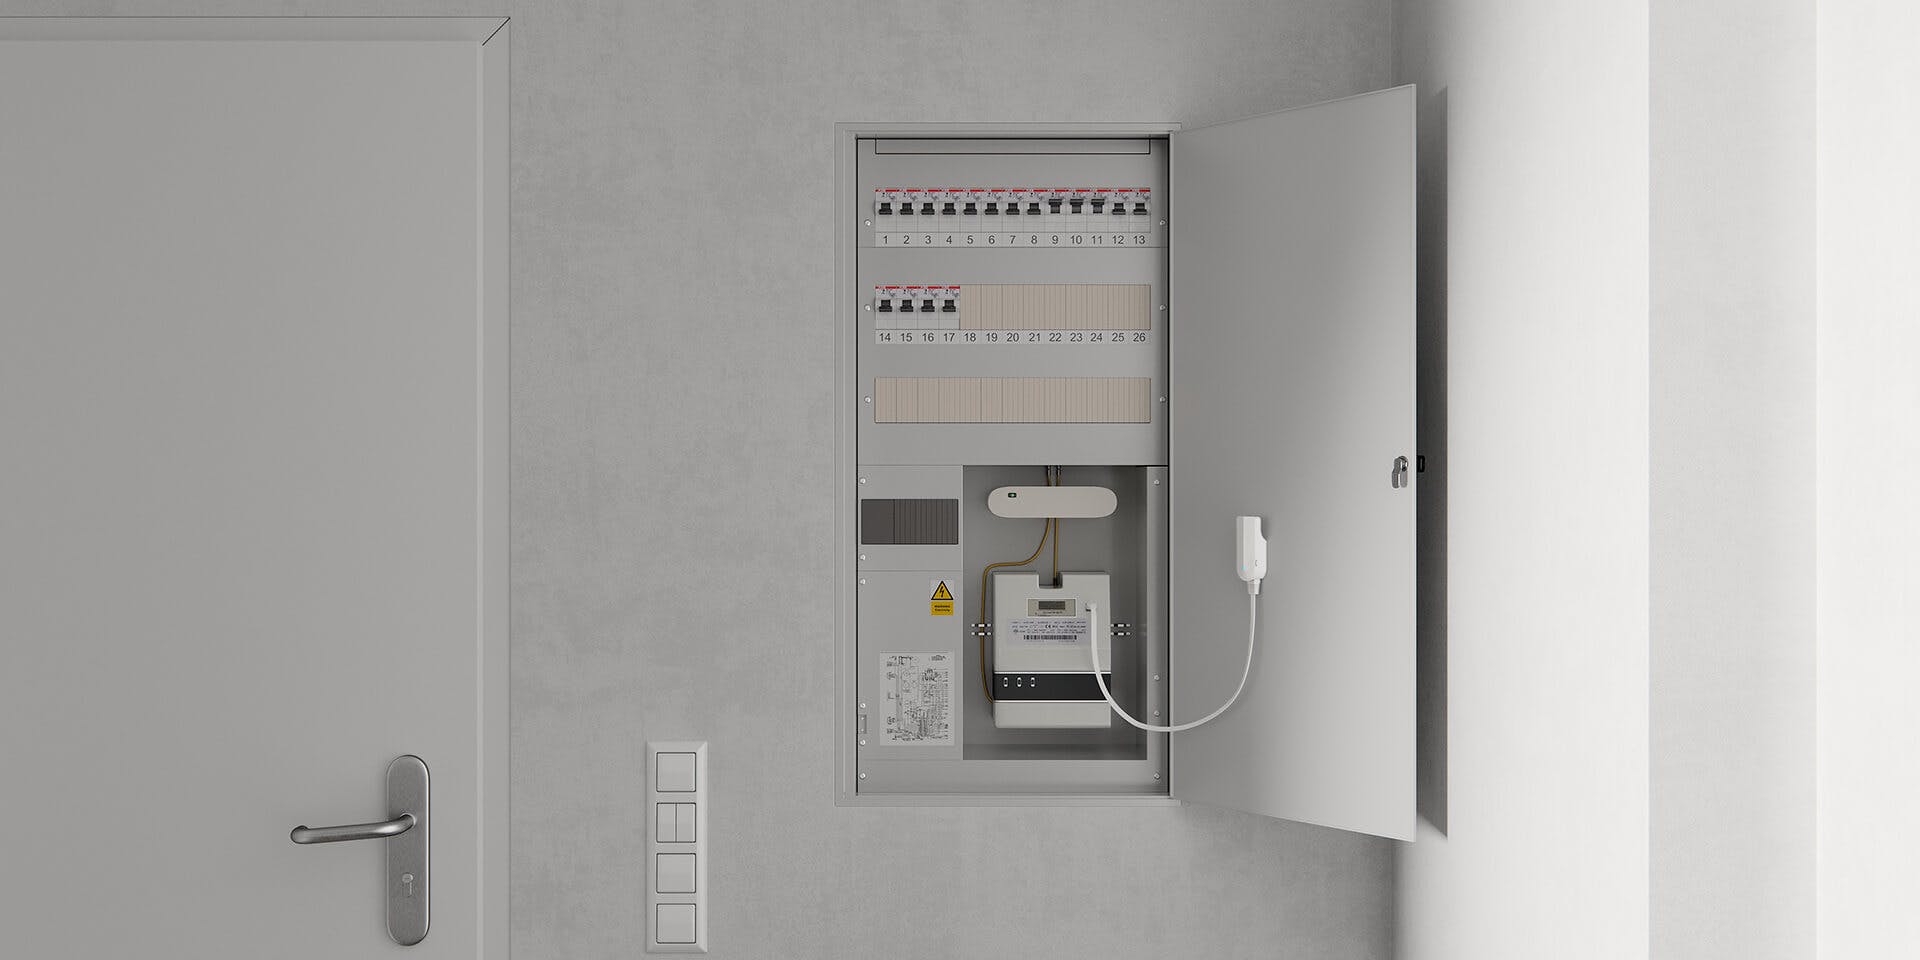 Find the Best Smart Meter for Your Smart Home in 2022